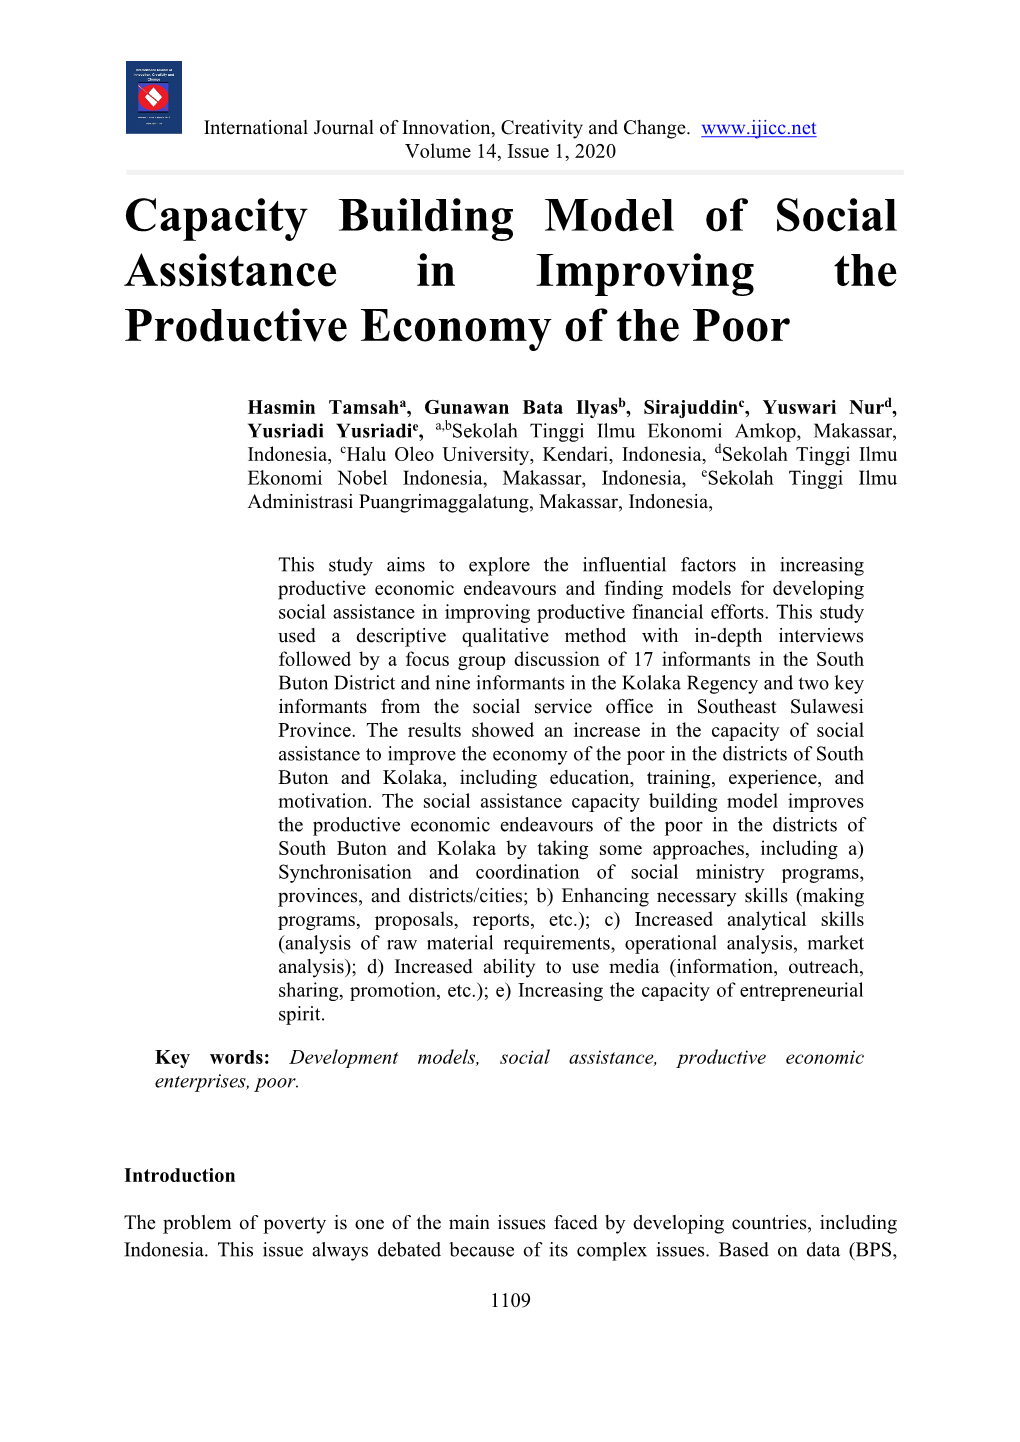 Capacity Building Model of Social Assistance in Improving the Productive Economy of the Poor